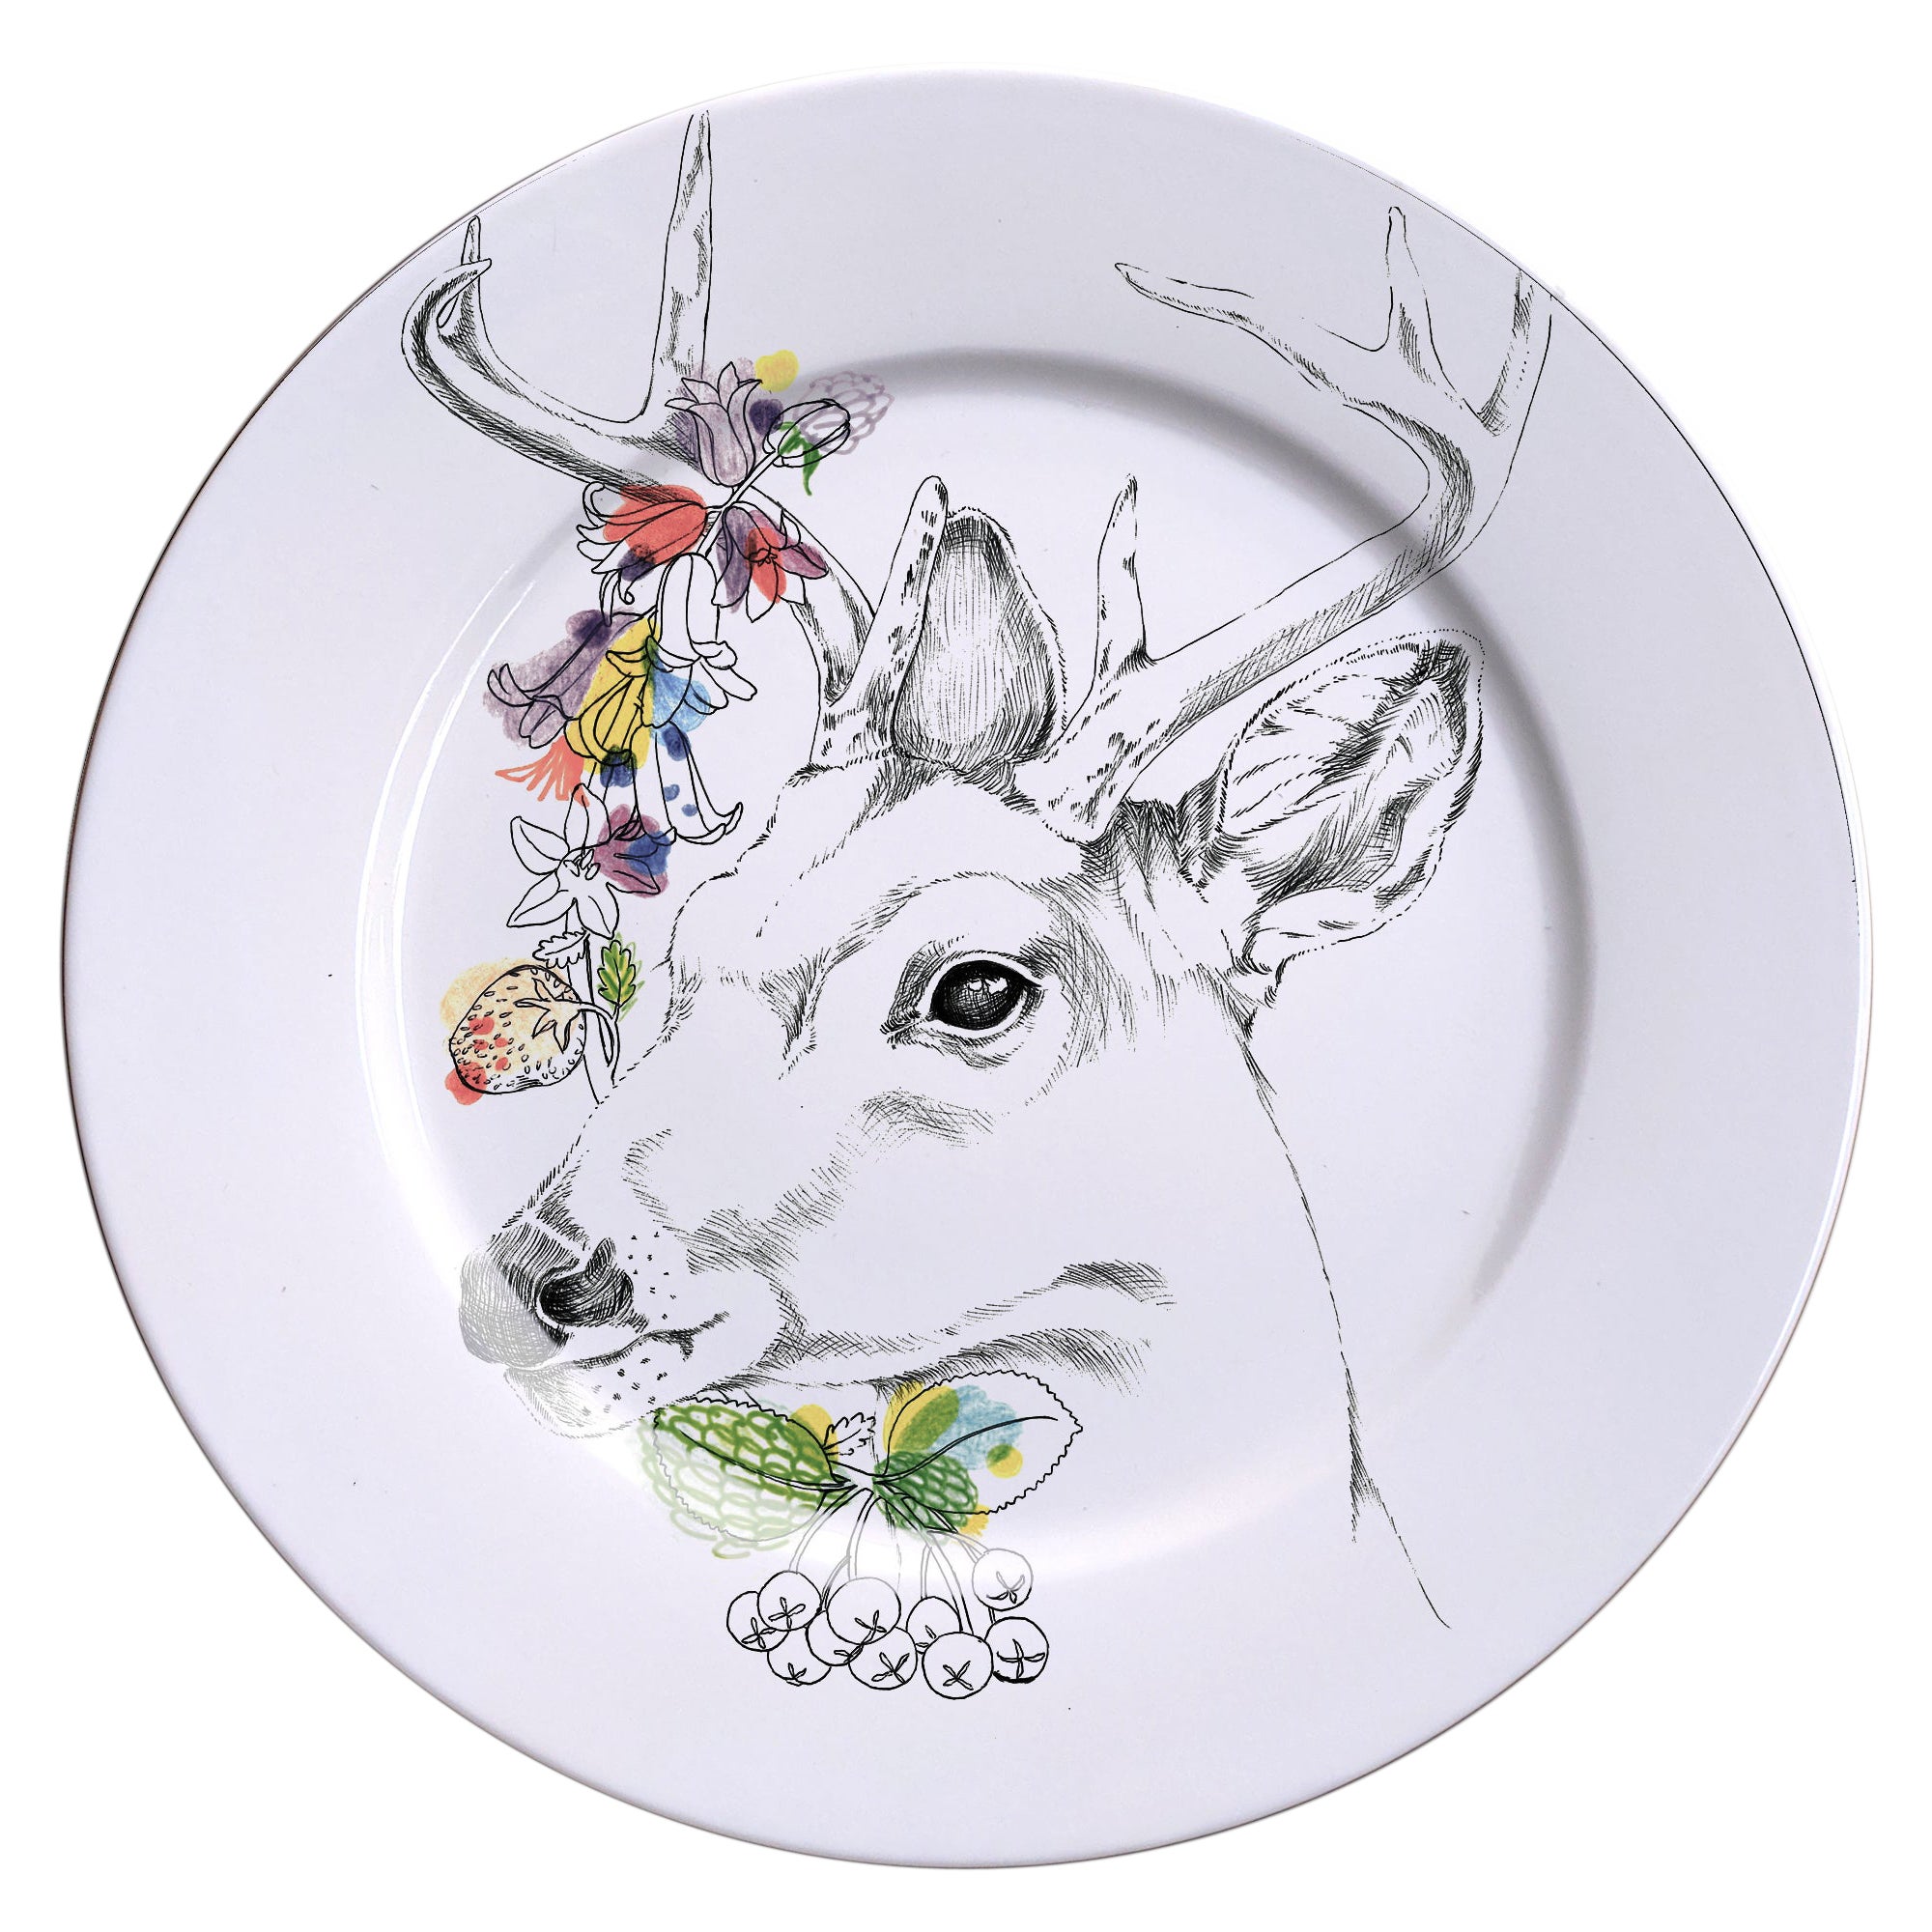 Ode to the Woods, Contemporary Porcelain Dinner Plate with Deer and Flowers